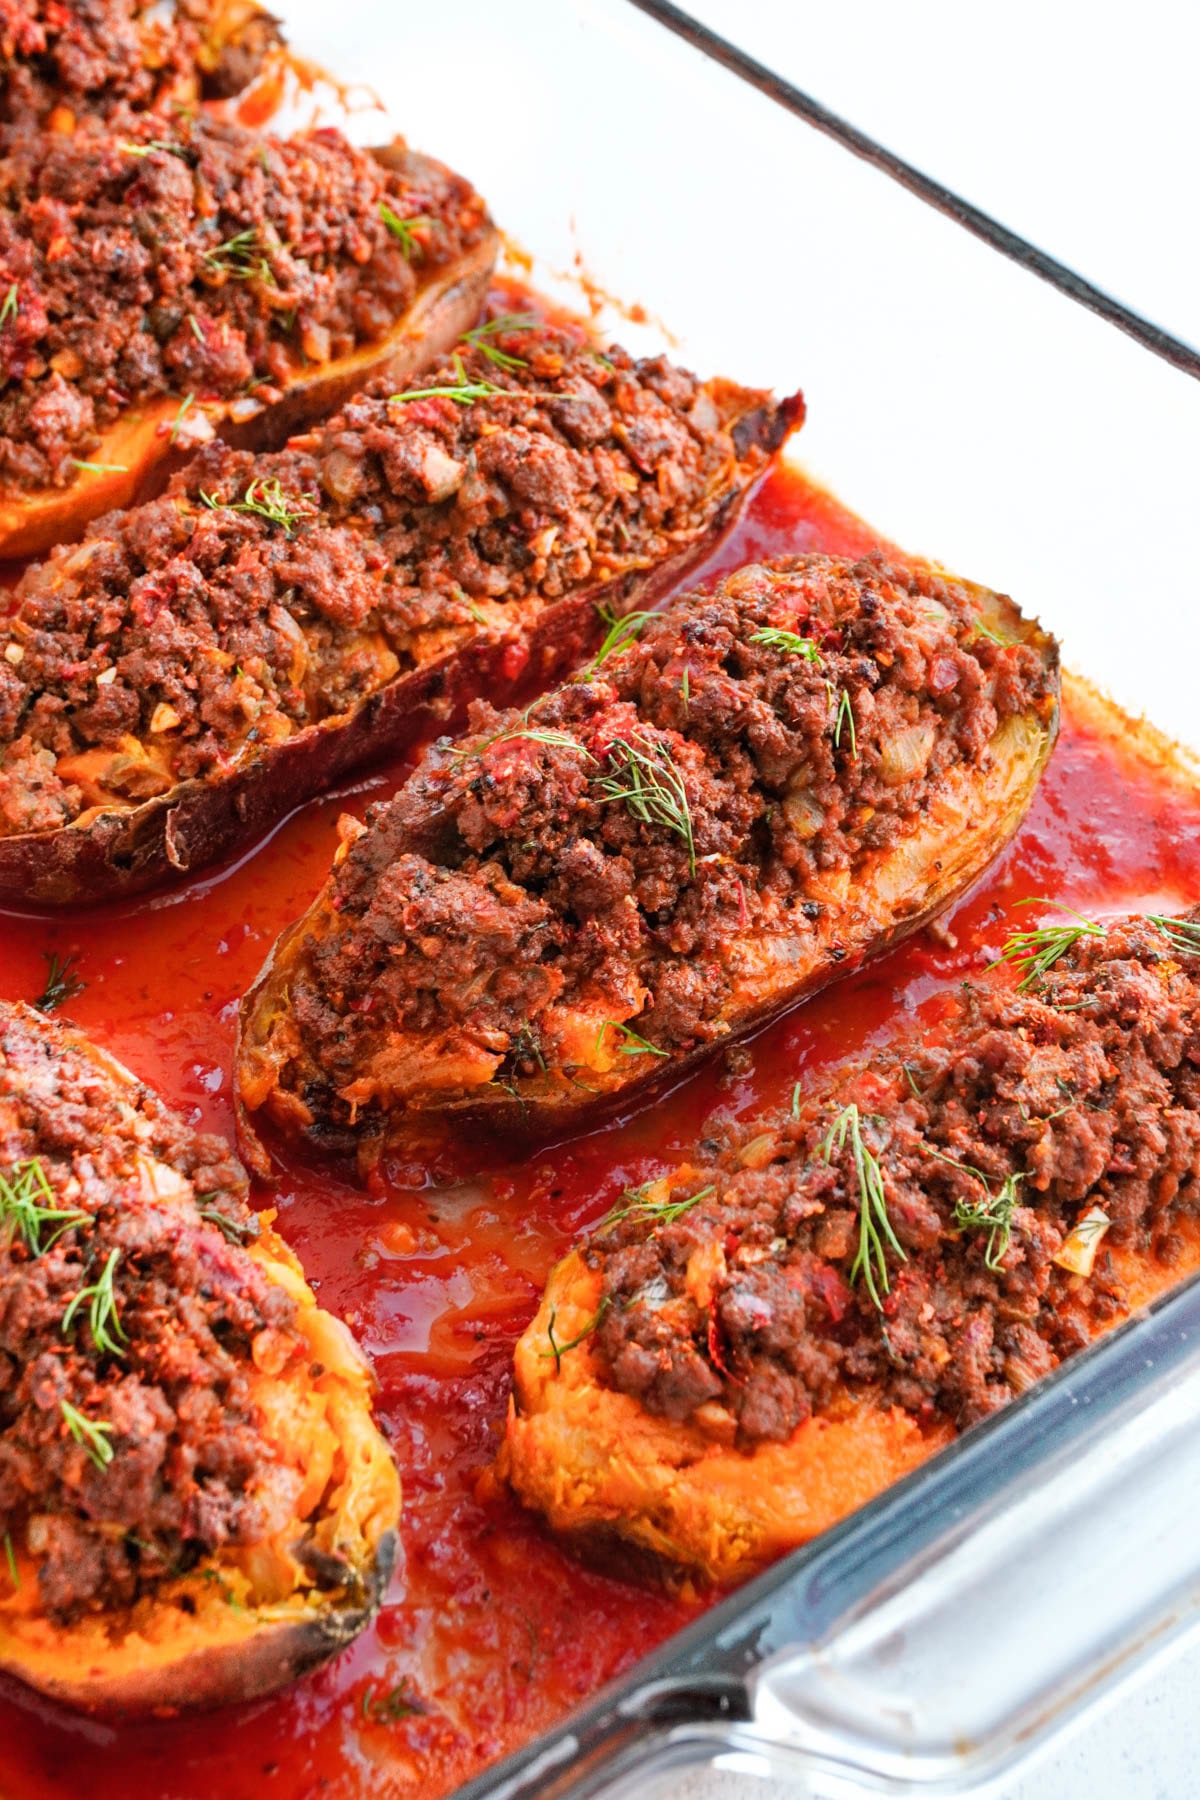 baked sweet potatoes in a baking dish